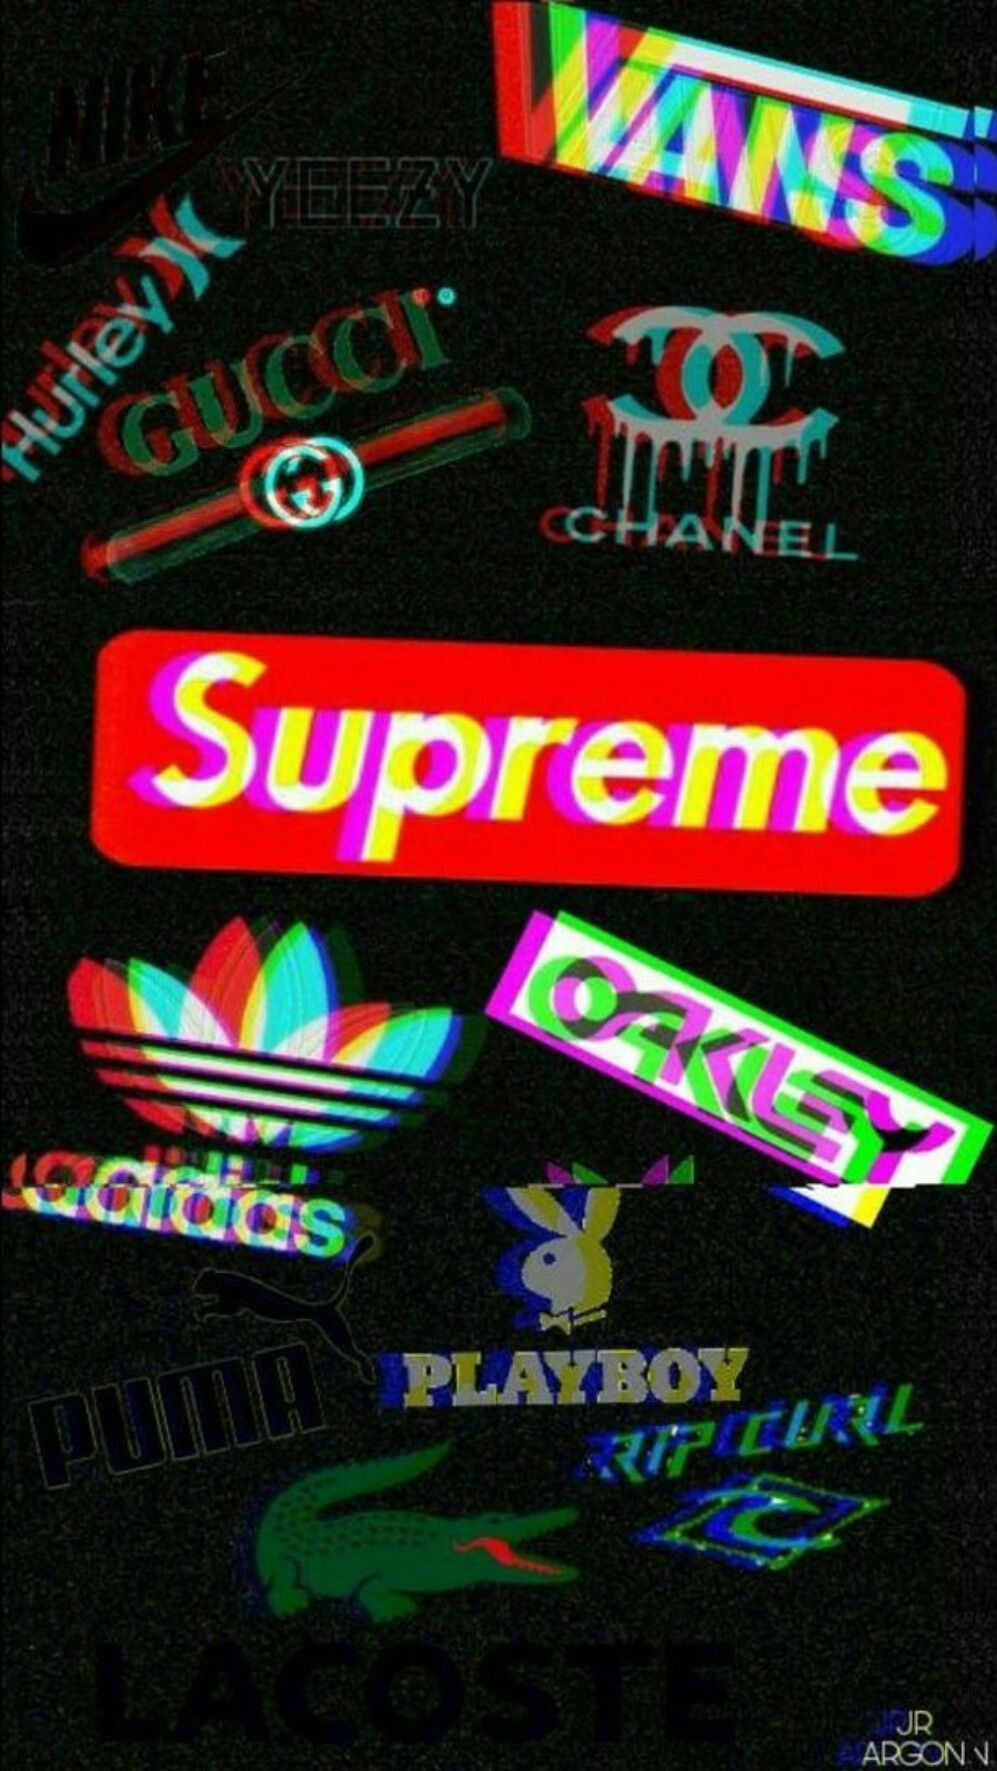 Aesthetic wallpaper for phone backgrounds. - Supreme